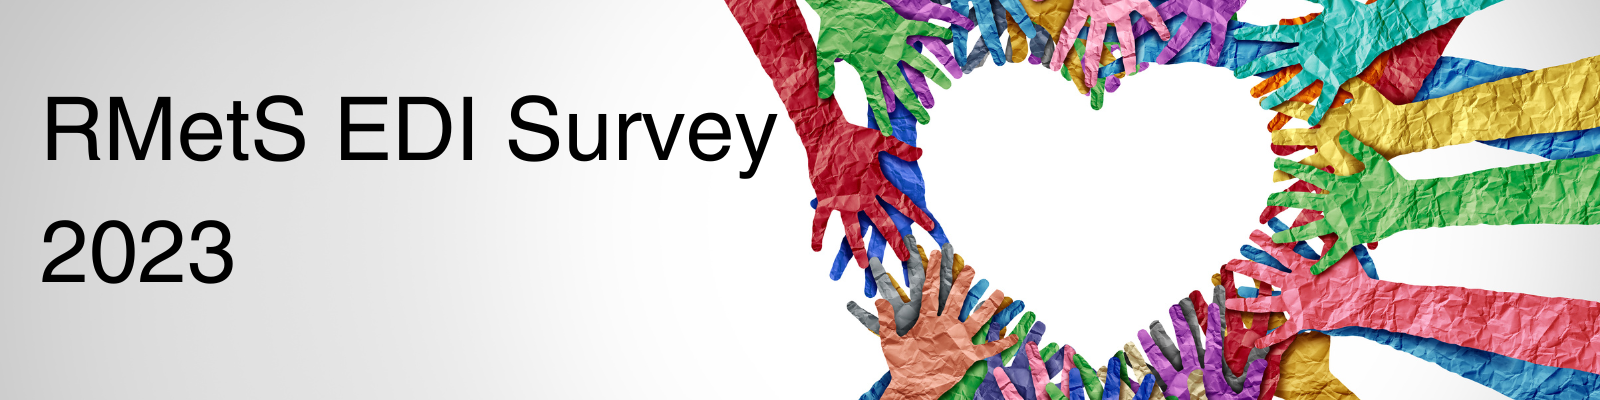 RMetS website banner for EDI survey summary showing different people's hands